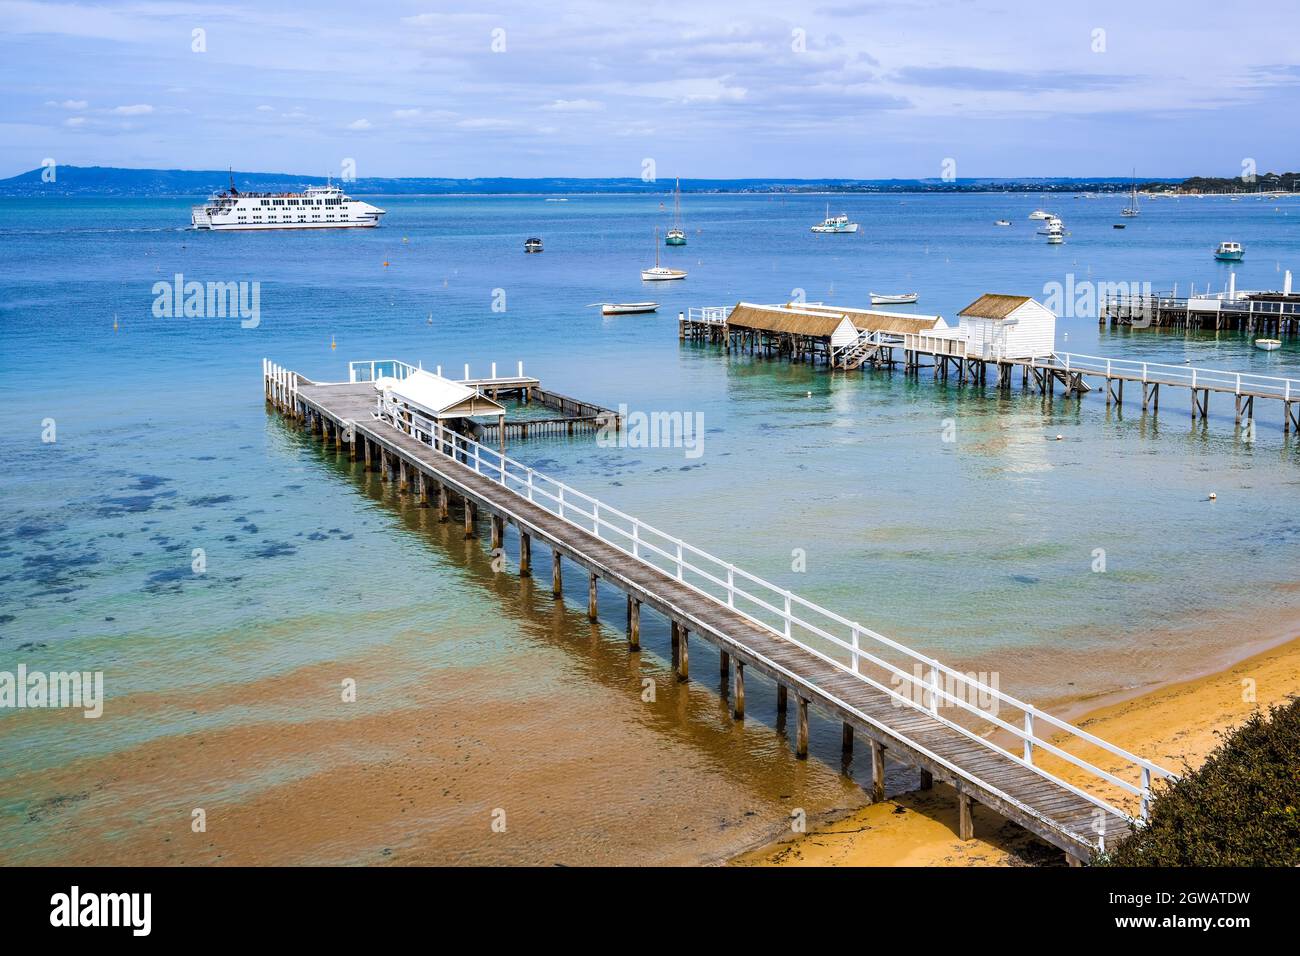 Coastal Landscape - Wooden Piers Extending Into Shallow Bay Water With Passenger Ferry Stock Photo